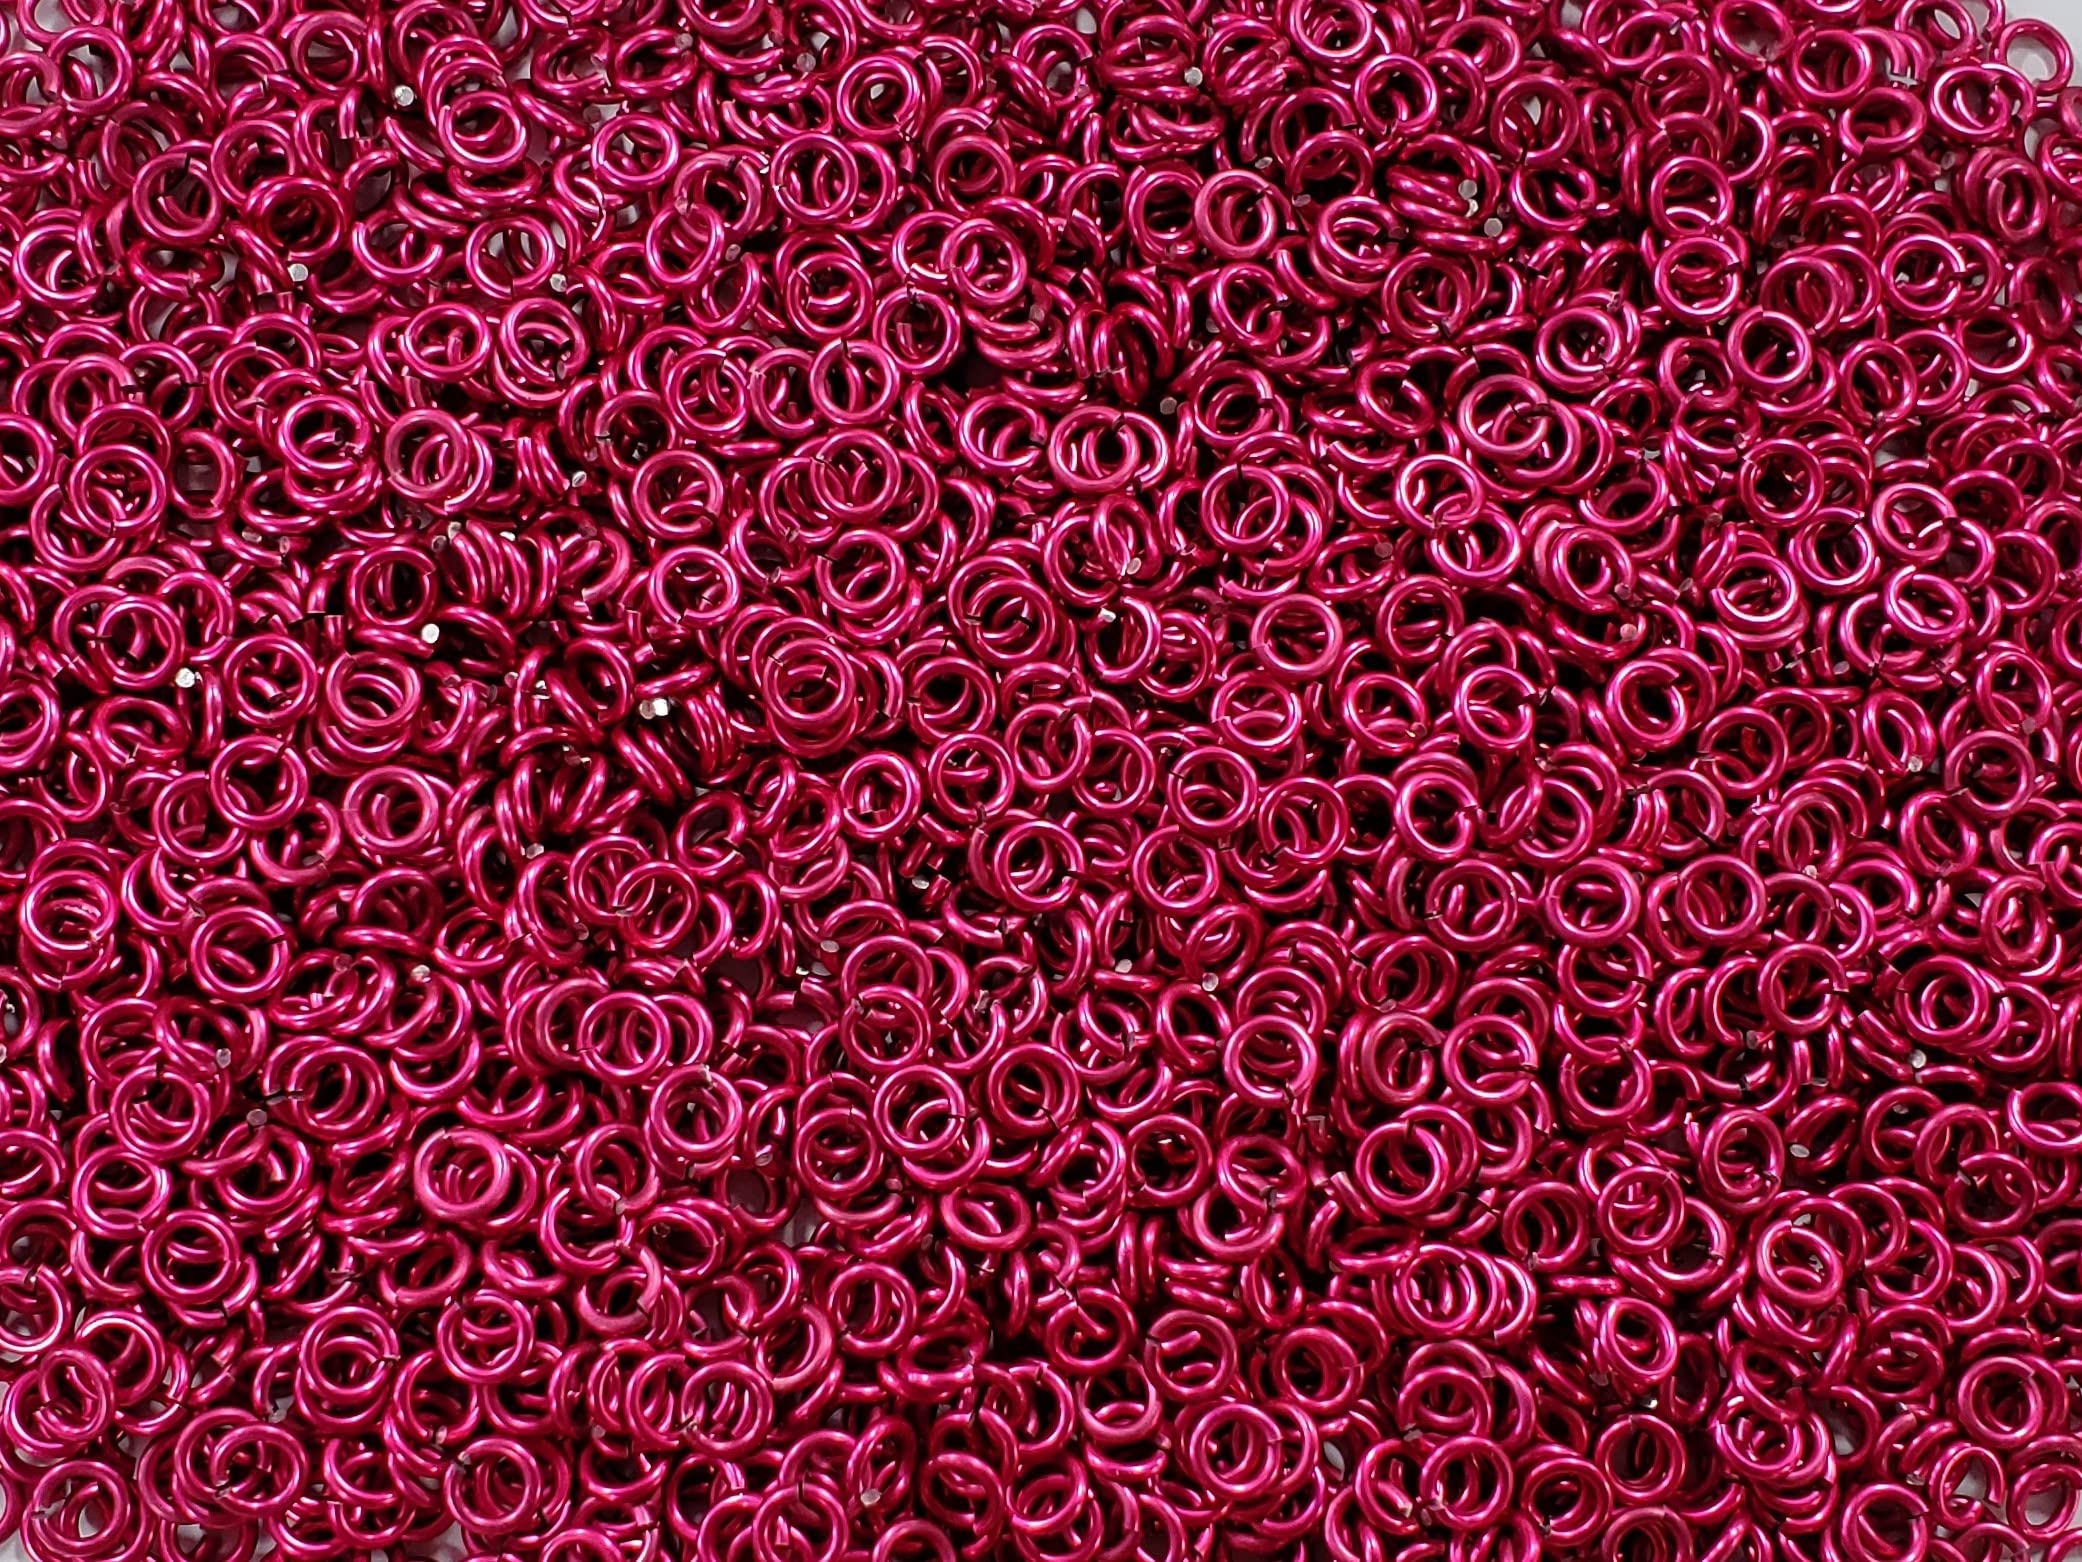 Chainmail Joe 12 Pound Cosmic Pink Anodized Aluminum Jump Rings 16G 316 Id  (2300 Rings)